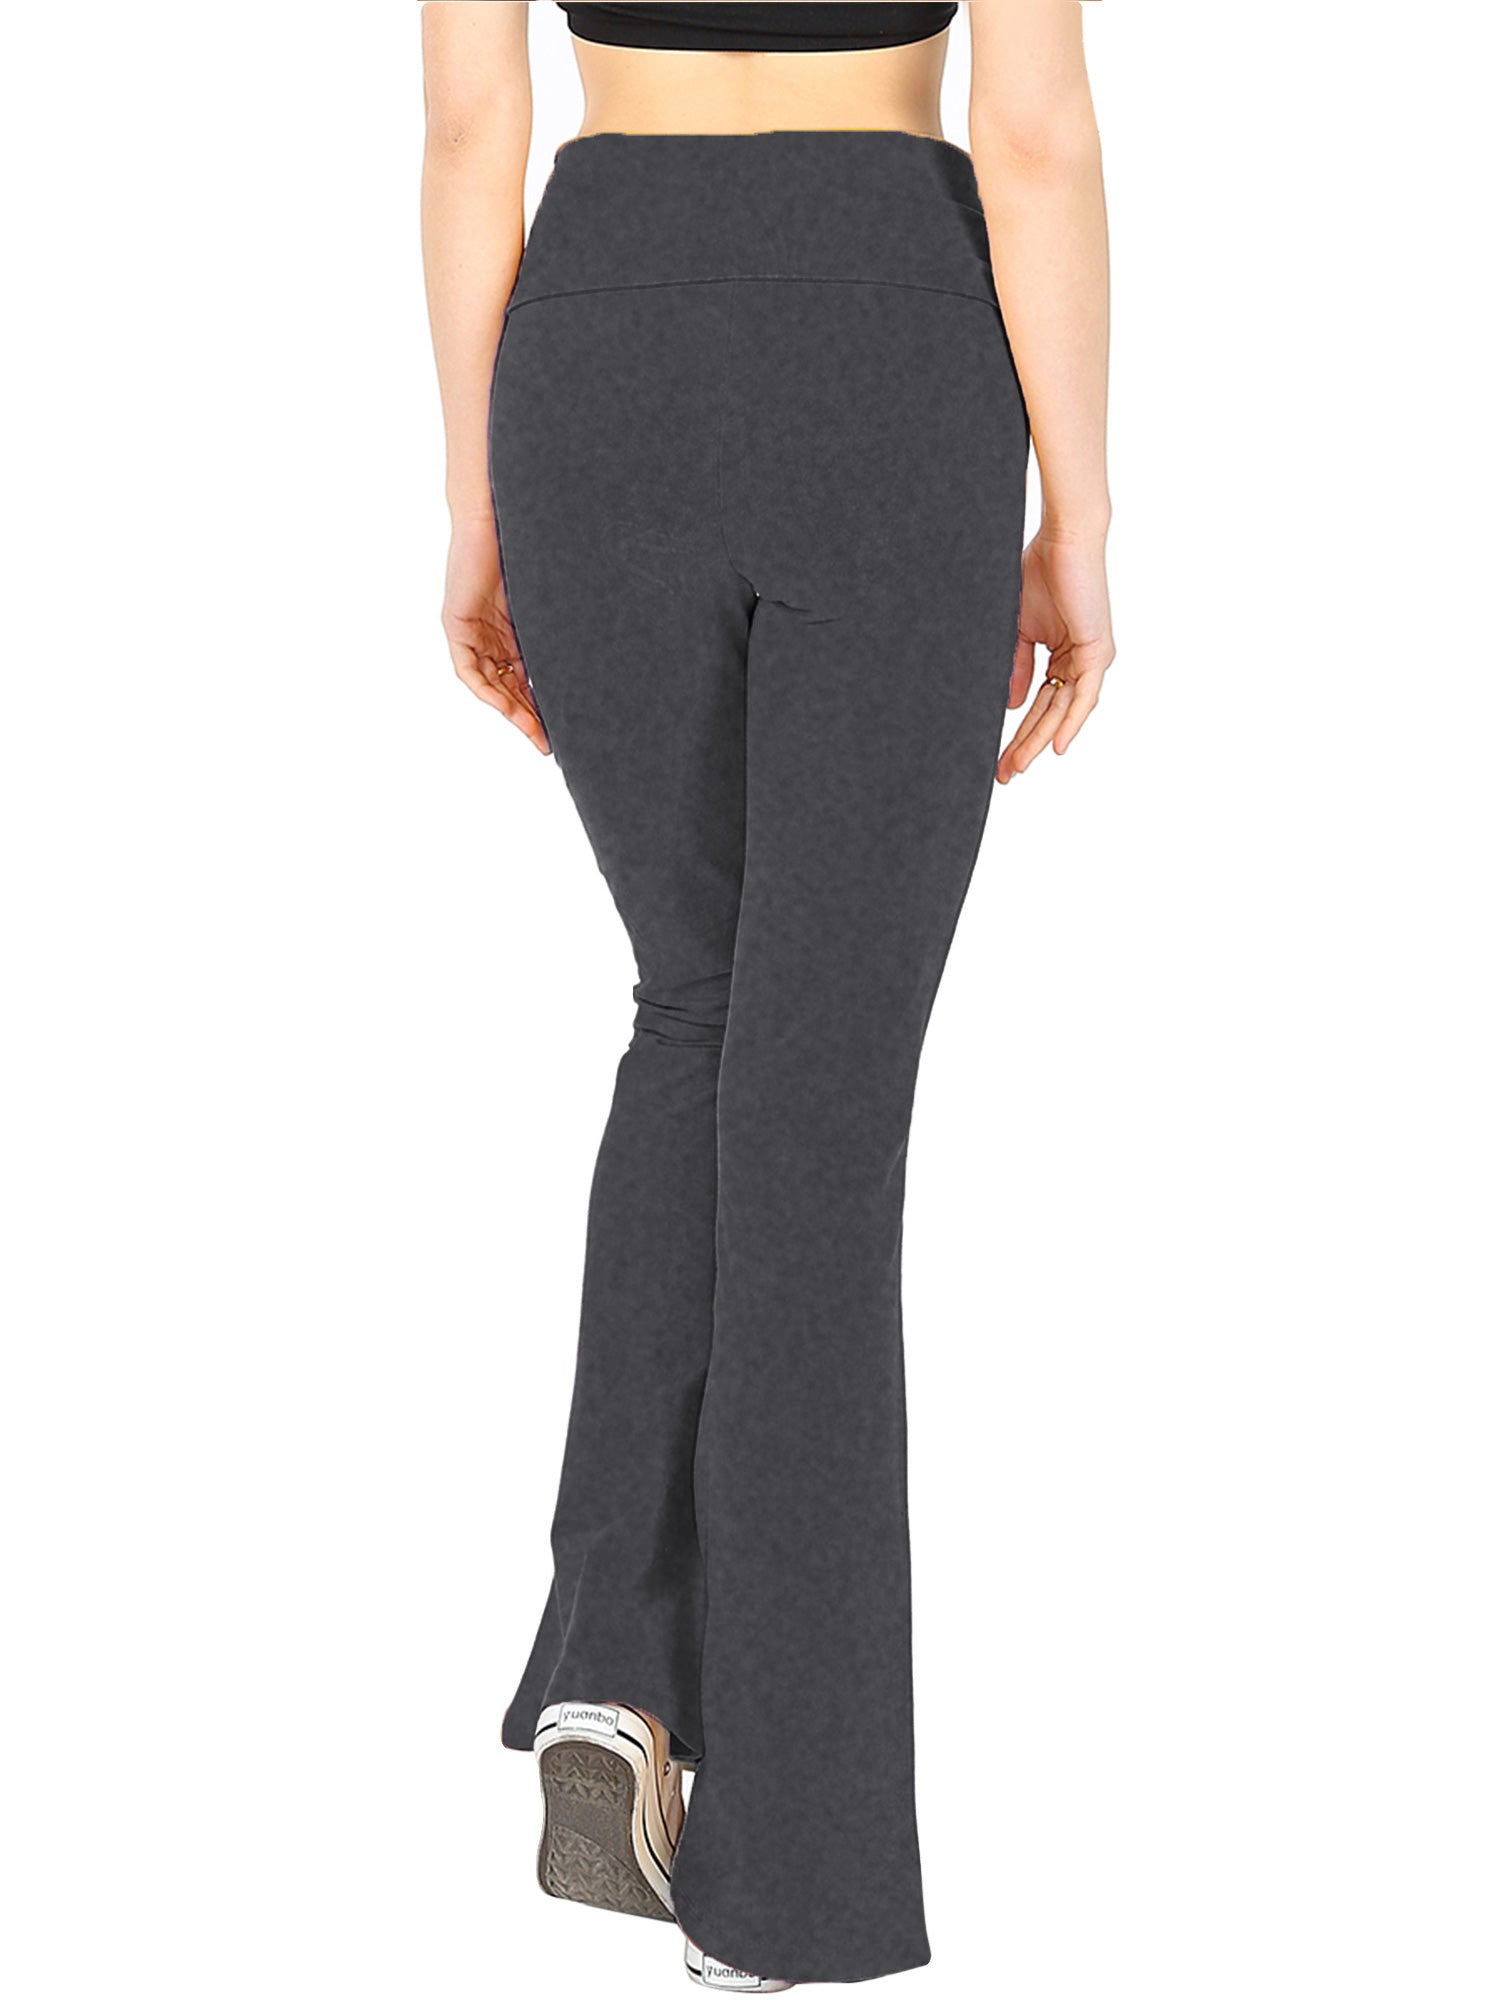 Hard Tail Contour Rolldown Cropped Cotton Yoga Leggings at EverydayYoga.com  - Free Shipping